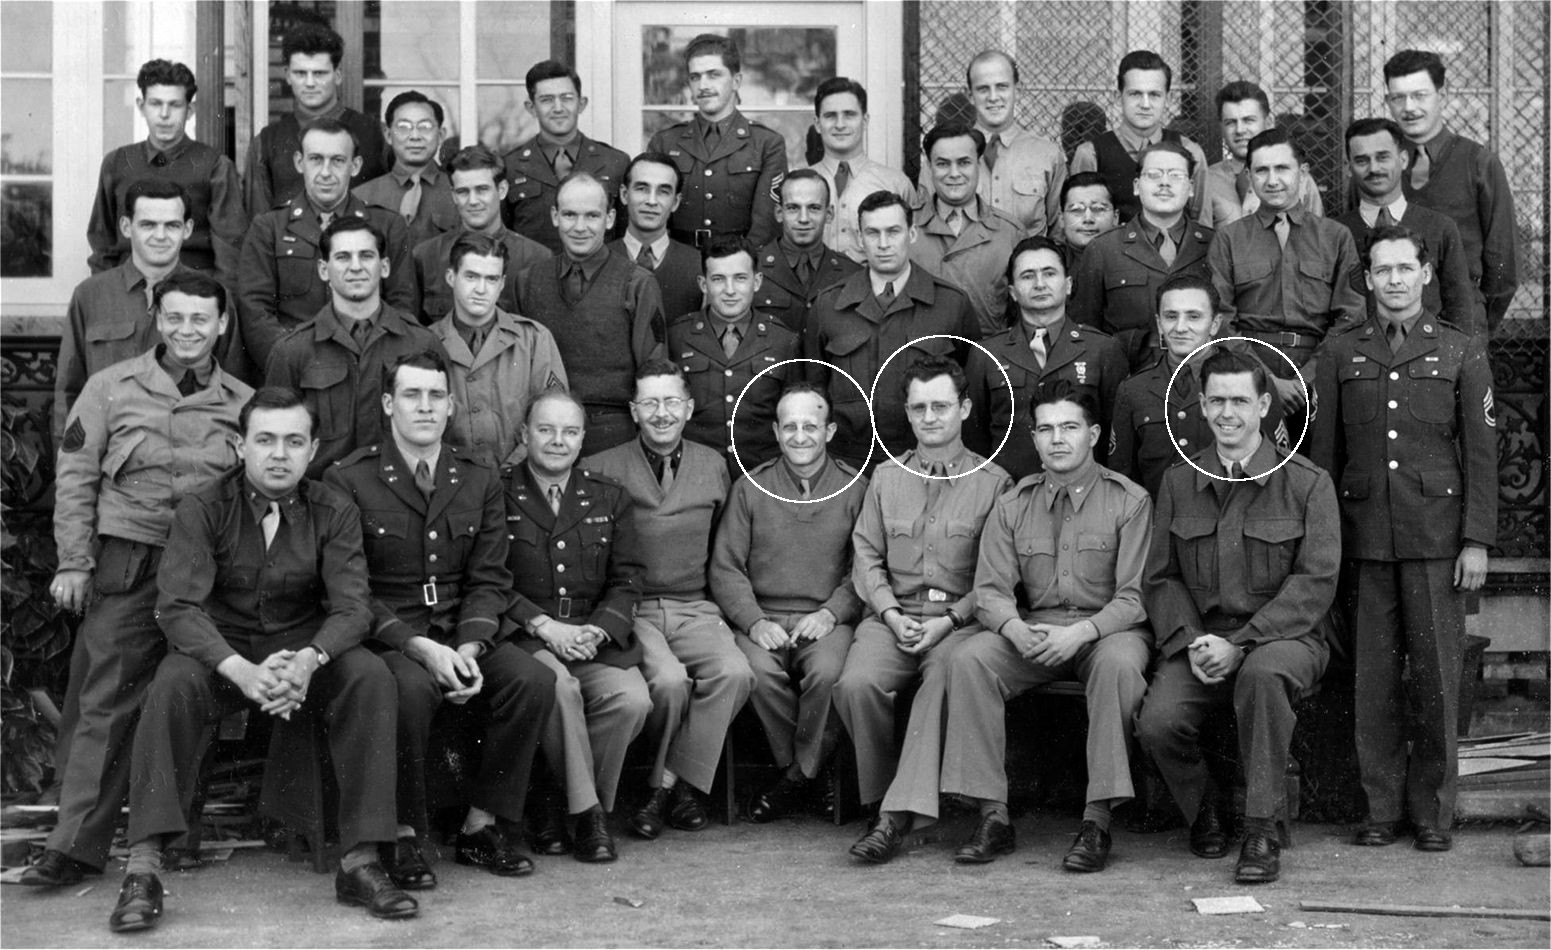 Sergeant Joseph E. Richard sits circled at far right in this photo of U.S. Signal Intelligence personnel at the Central Bureau headquarters in Brisbane, Australia. The other two individuals circled are Colonel Abraham Sinkov (left) and Lt. Col. Harry Clark.